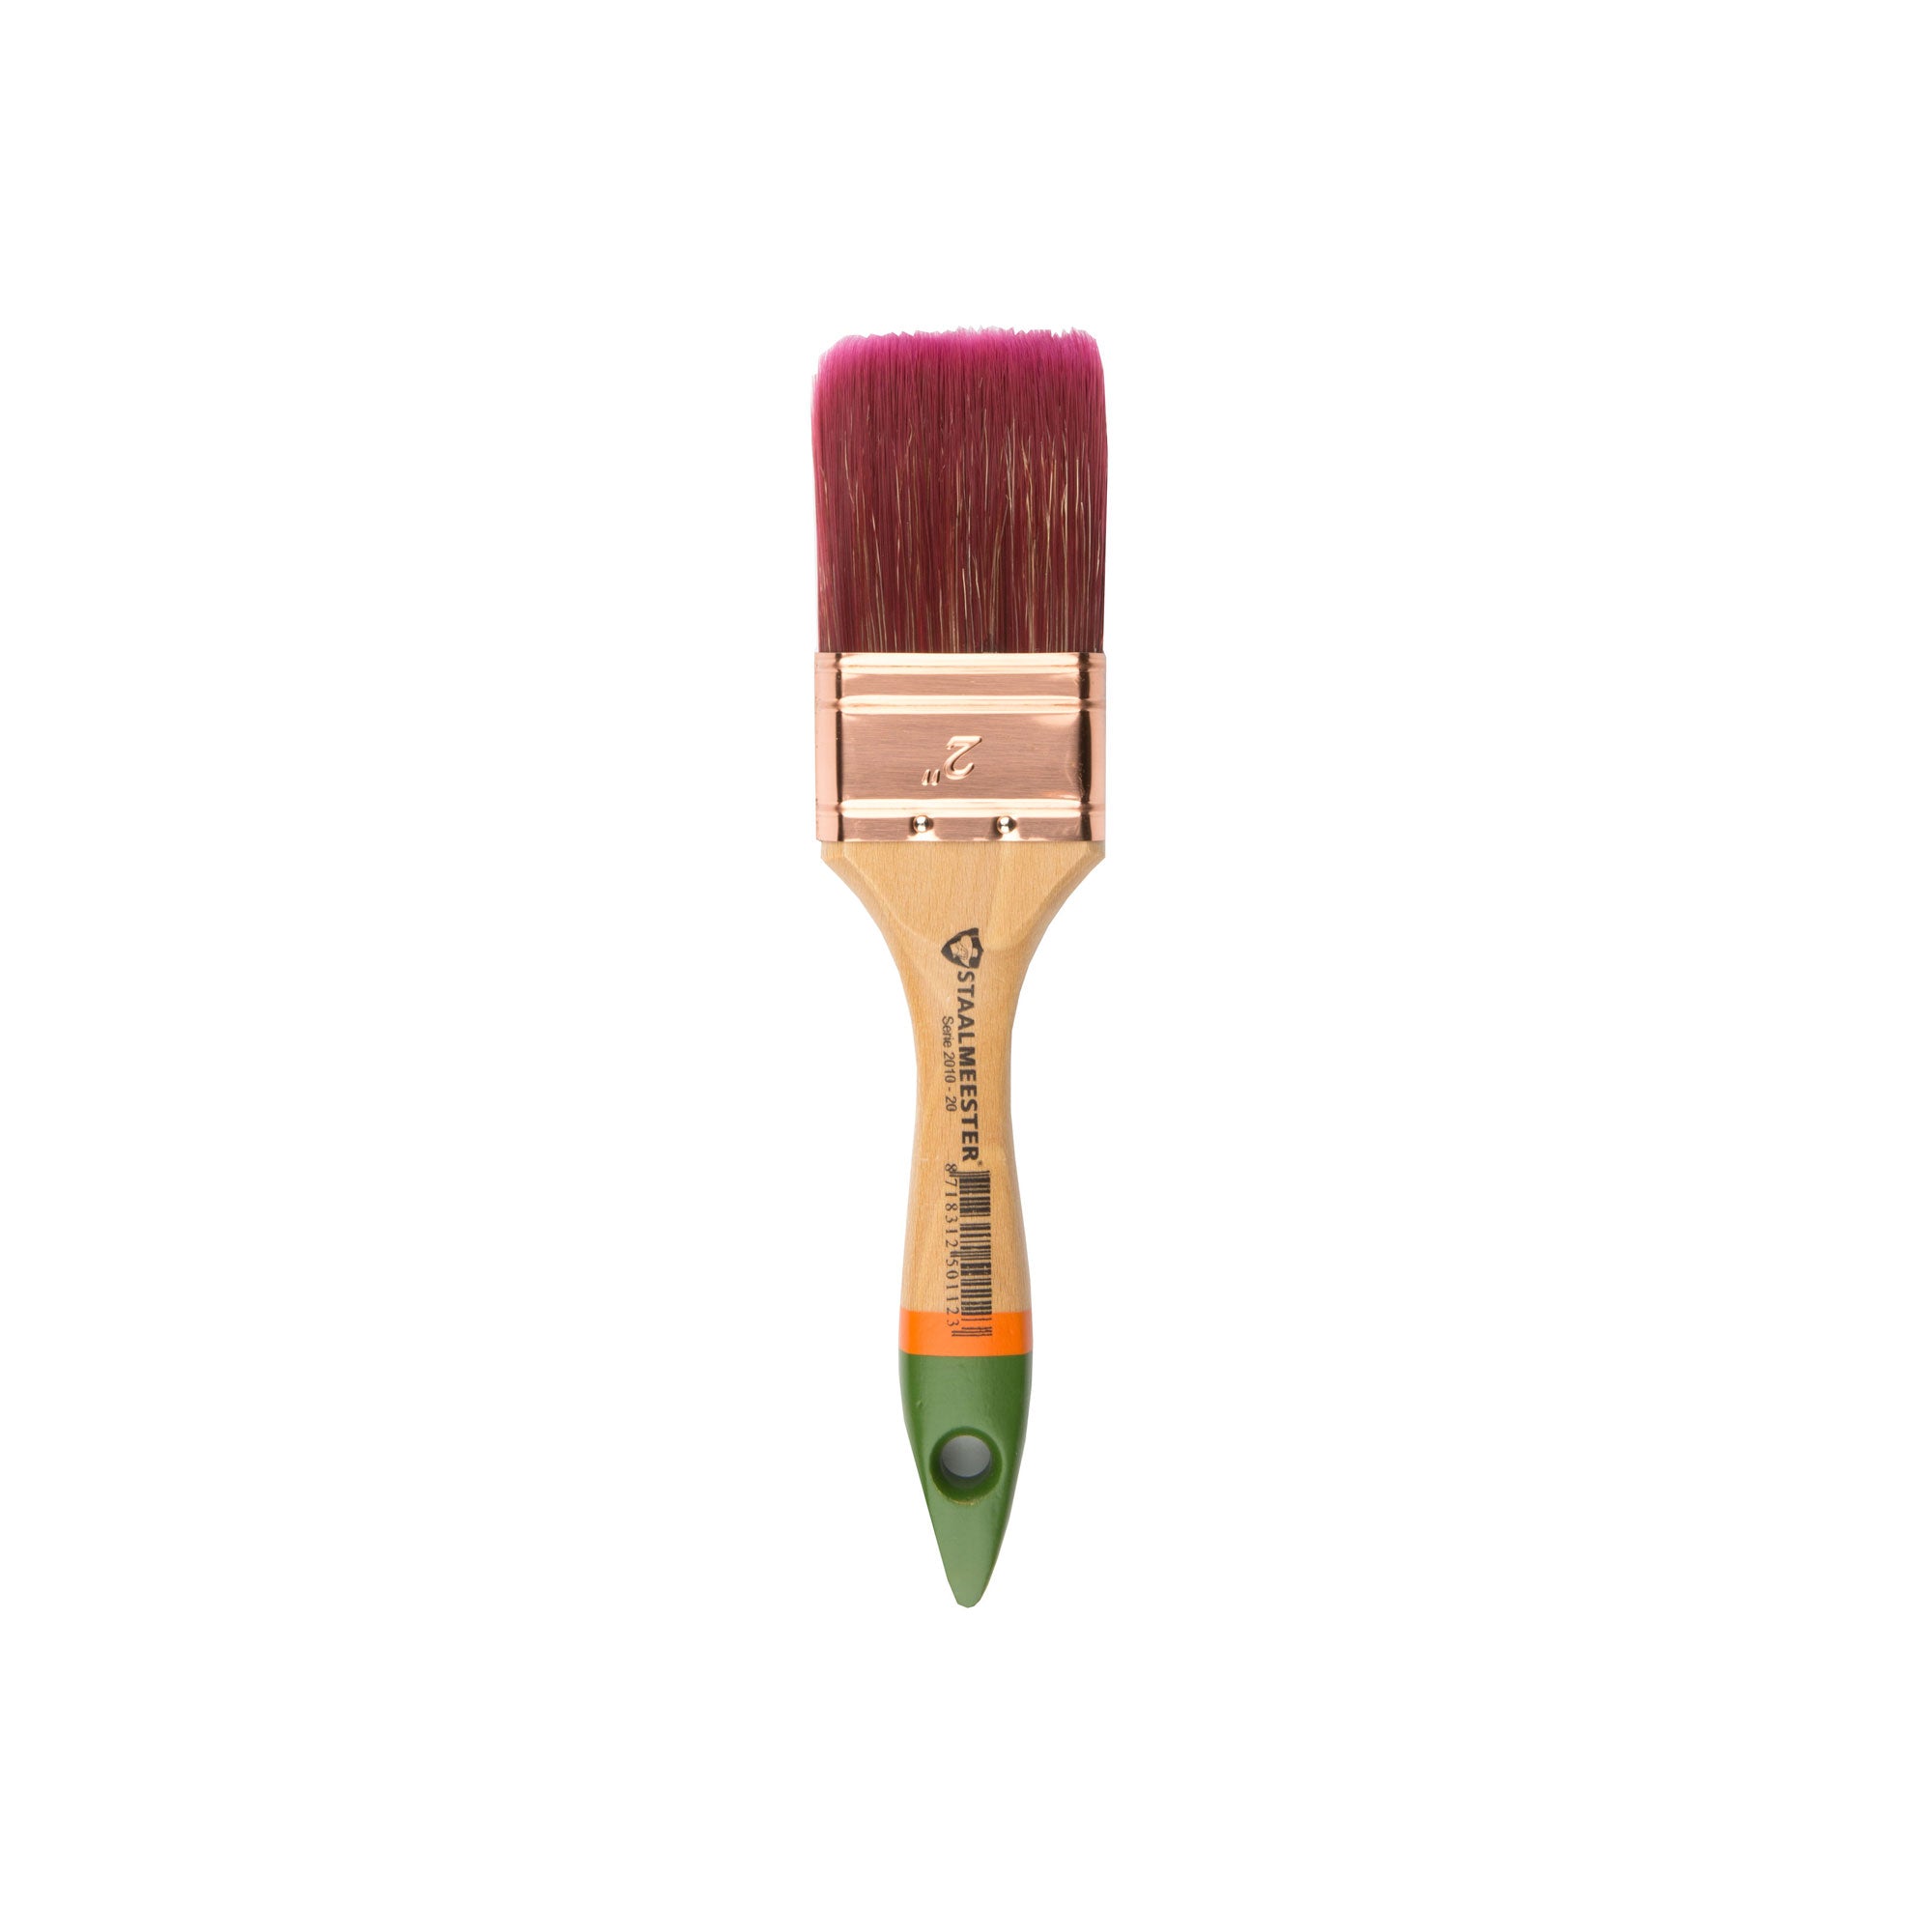 Fusion_Mineral_Paint_Staalmeester_20_Flat_Synthetic_Natural_Fiber_Brush.jpg